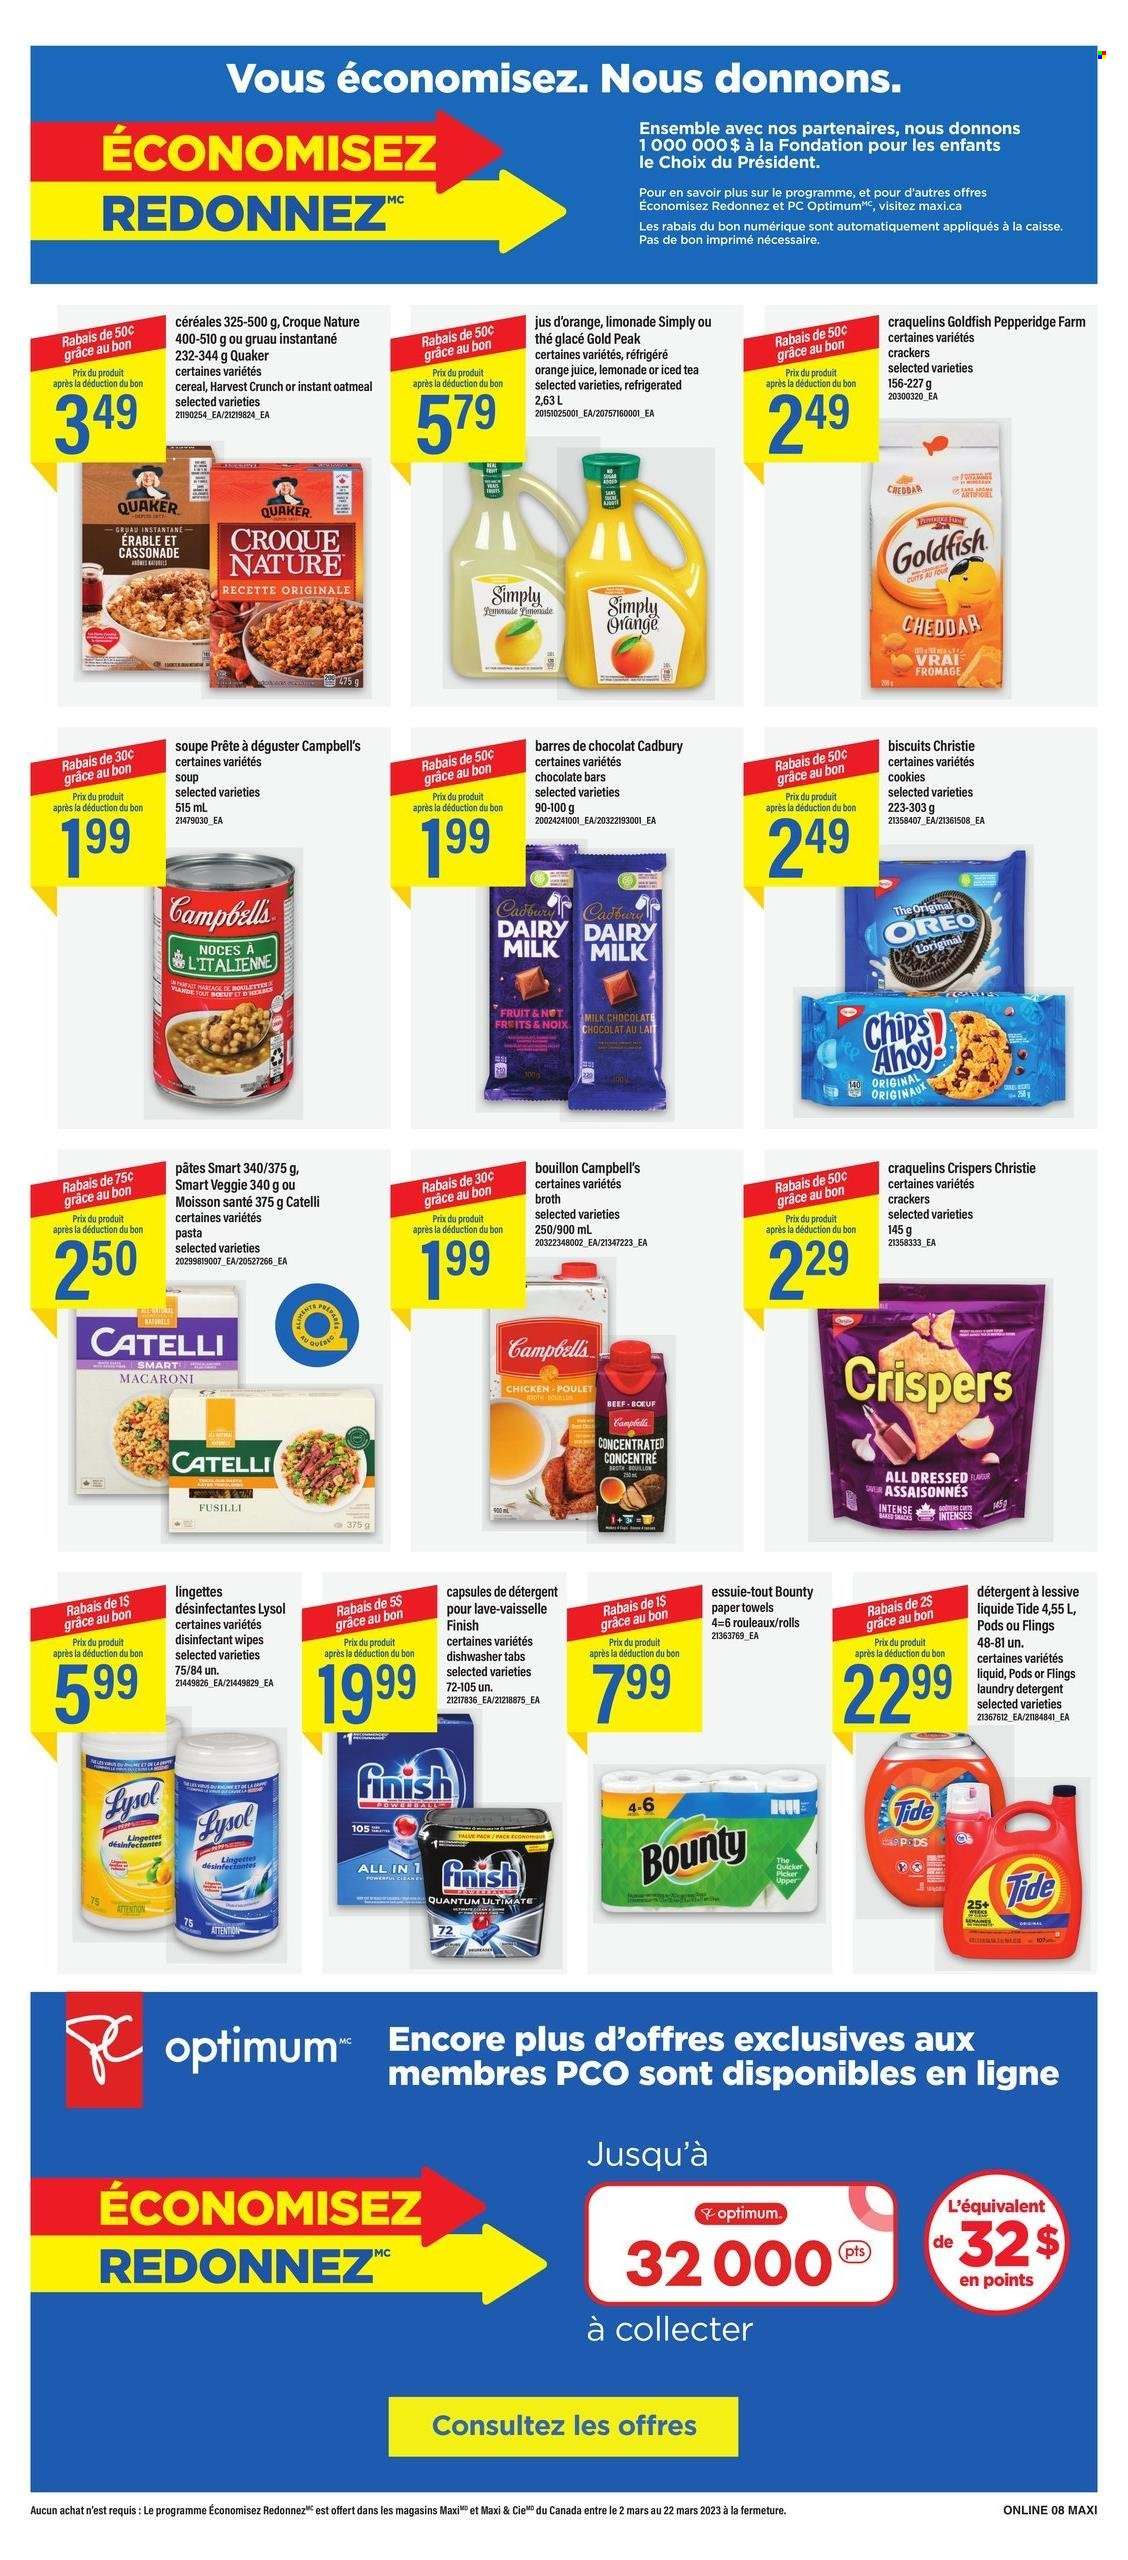 thumbnail - Maxi Flyer - March 16, 2023 - March 22, 2023 - Sales products - Campbell's, macaroni, soup, pasta, Quaker, cheese, Président, cookies, milk chocolate, Bounty, Mars, crackers, biscuit, Cadbury, Dairy Milk, chocolate bar, chips, Goldfish, bouillon, oatmeal, broth, cereals, lemonade, orange juice, juice, ice tea, wipes, kitchen towels, paper towels, Lysol, Tide, laundry detergent, detergent, Oreo, desinfection. Page 13.